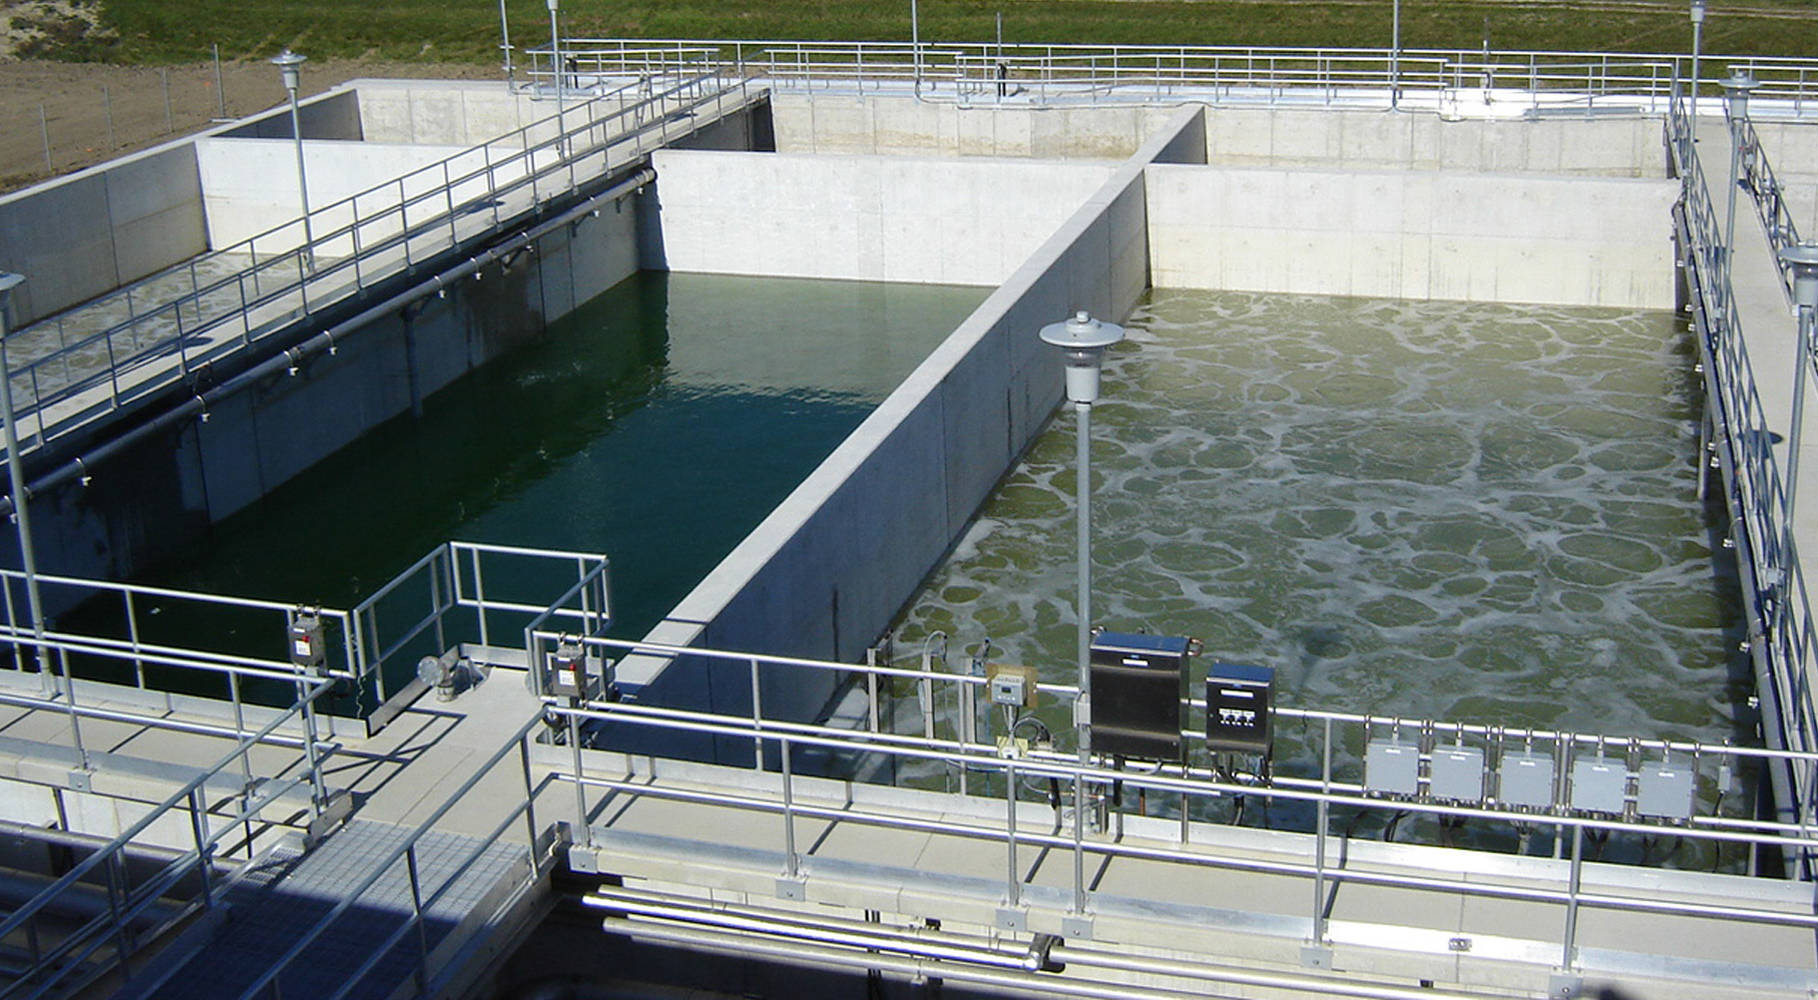 Rewatec SBR system for a large-scale municipal wastewater treatment project in the United States.